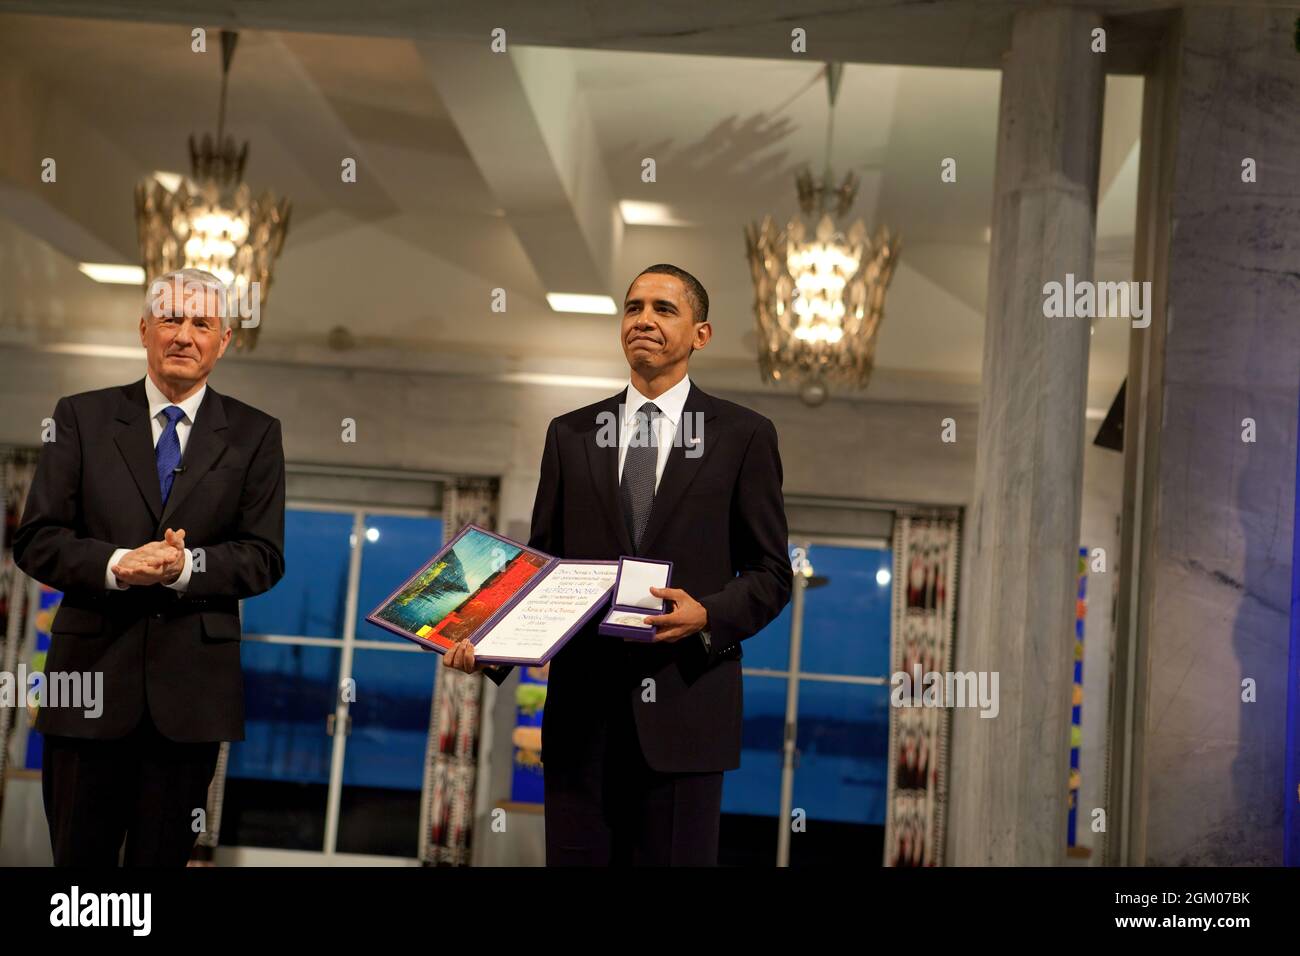 Nobel Committee Chairman Thorbjorn Jagland presents President Barack Obama with the Nobel Prize medal and diploma during the Nobel Peace Prize ceremony in Raadhuset Main Hall at Oslo City Hall in Oslo, Norway, Dec. 10, 2009. (Official White House Photo by Samantha Appleton) This official White House photograph is being made available only for publication by news organizations and/or for personal use printing by the subject(s) of the photograph. The photograph may not be manipulated in any way and may not be used in commercial or political materials, advertisements, emails, products, promotions Stock Photo